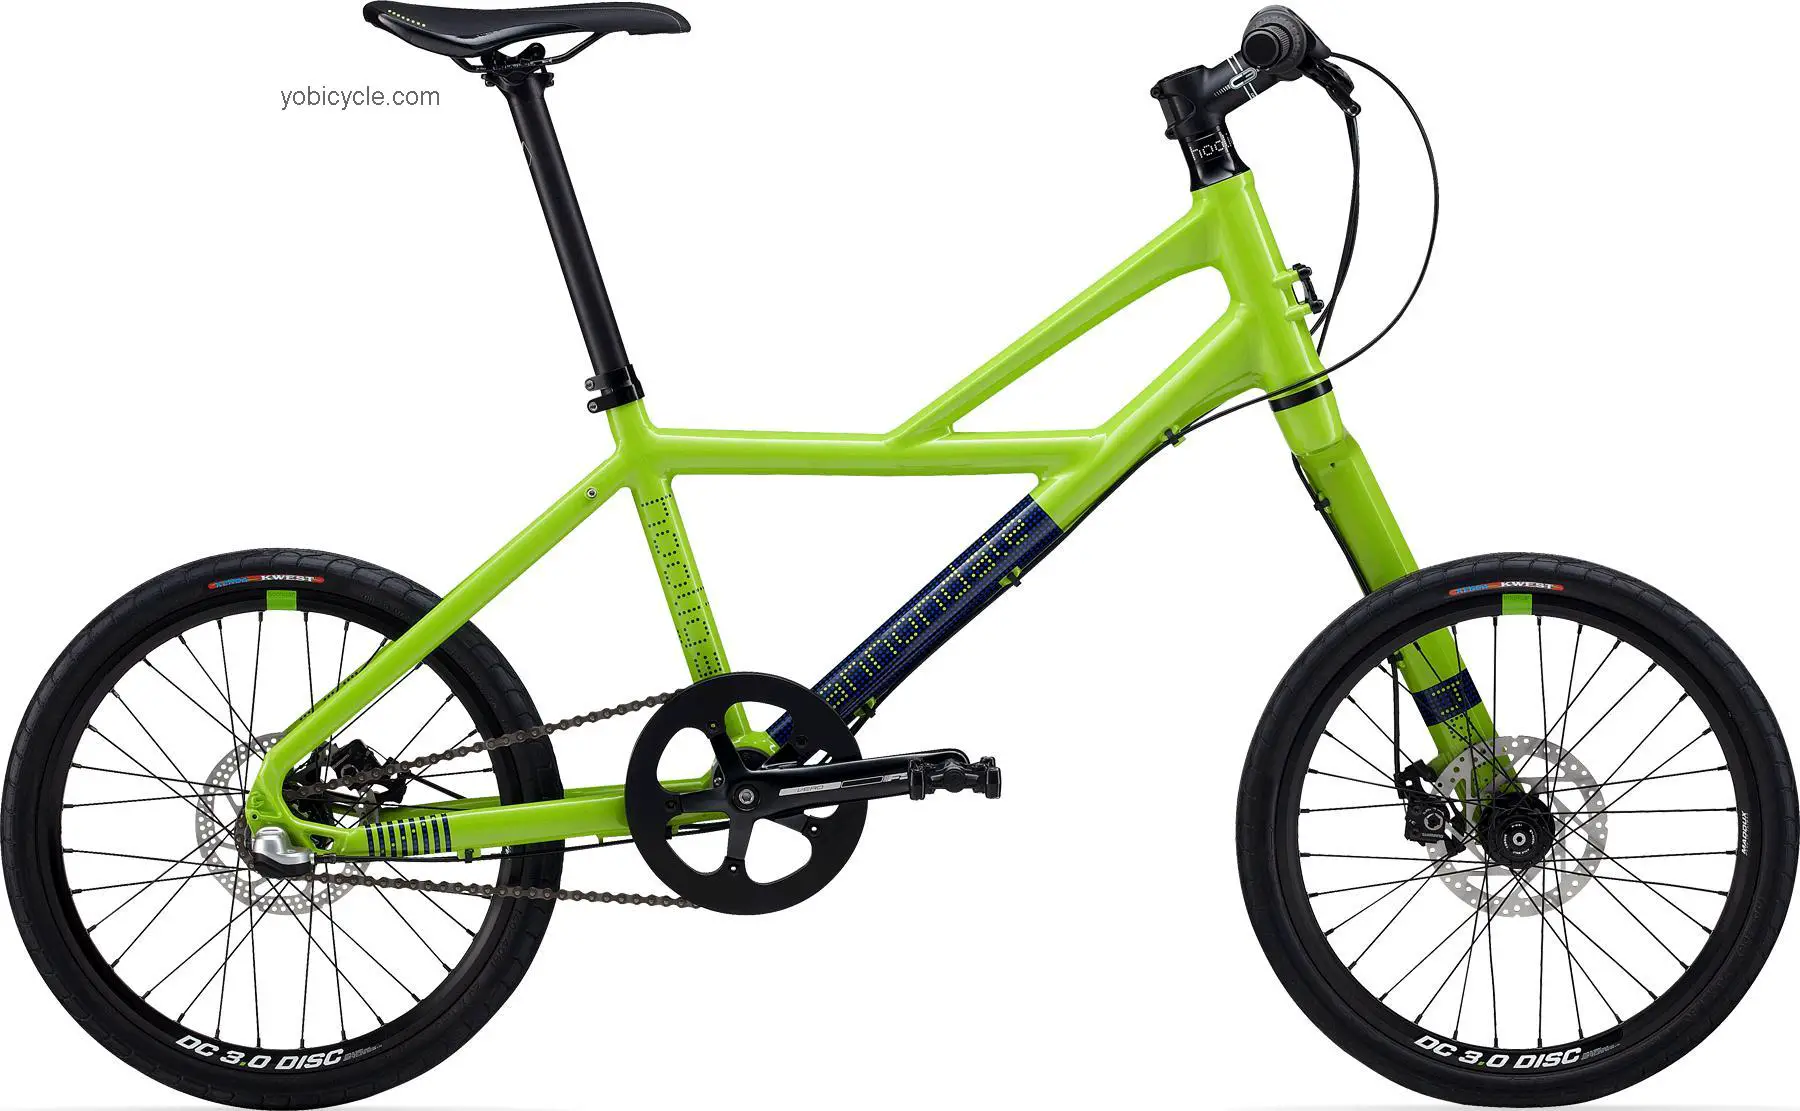 Cannondale Hooligan 1 2012 comparison online with competitors